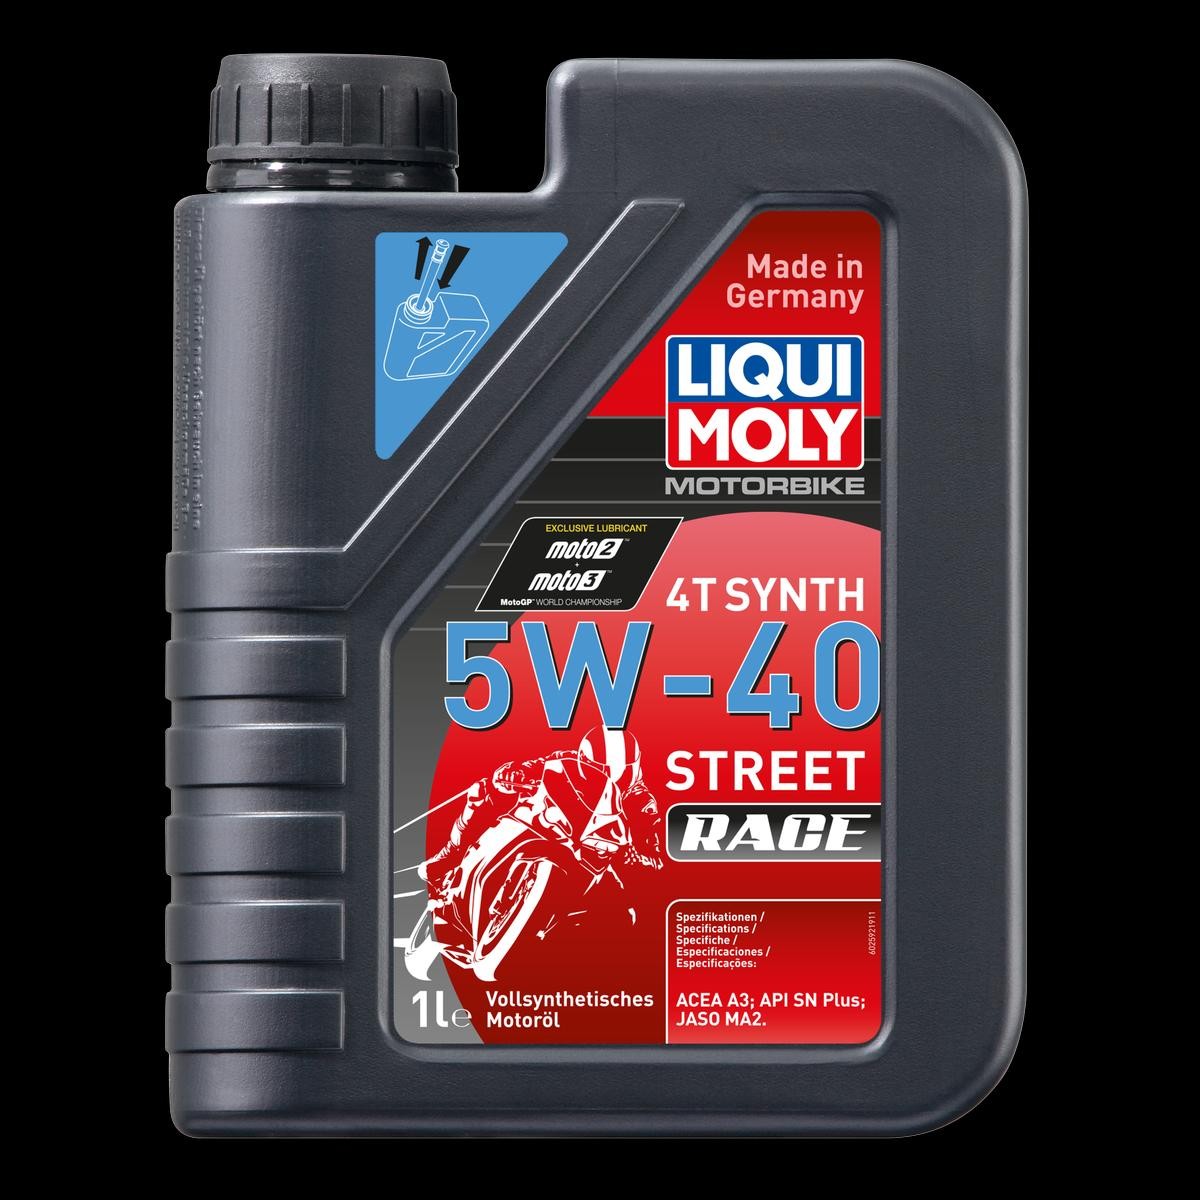 Engine Oil LIQUI MOLY 2592 S Motorcycle Moped Maxi scooter